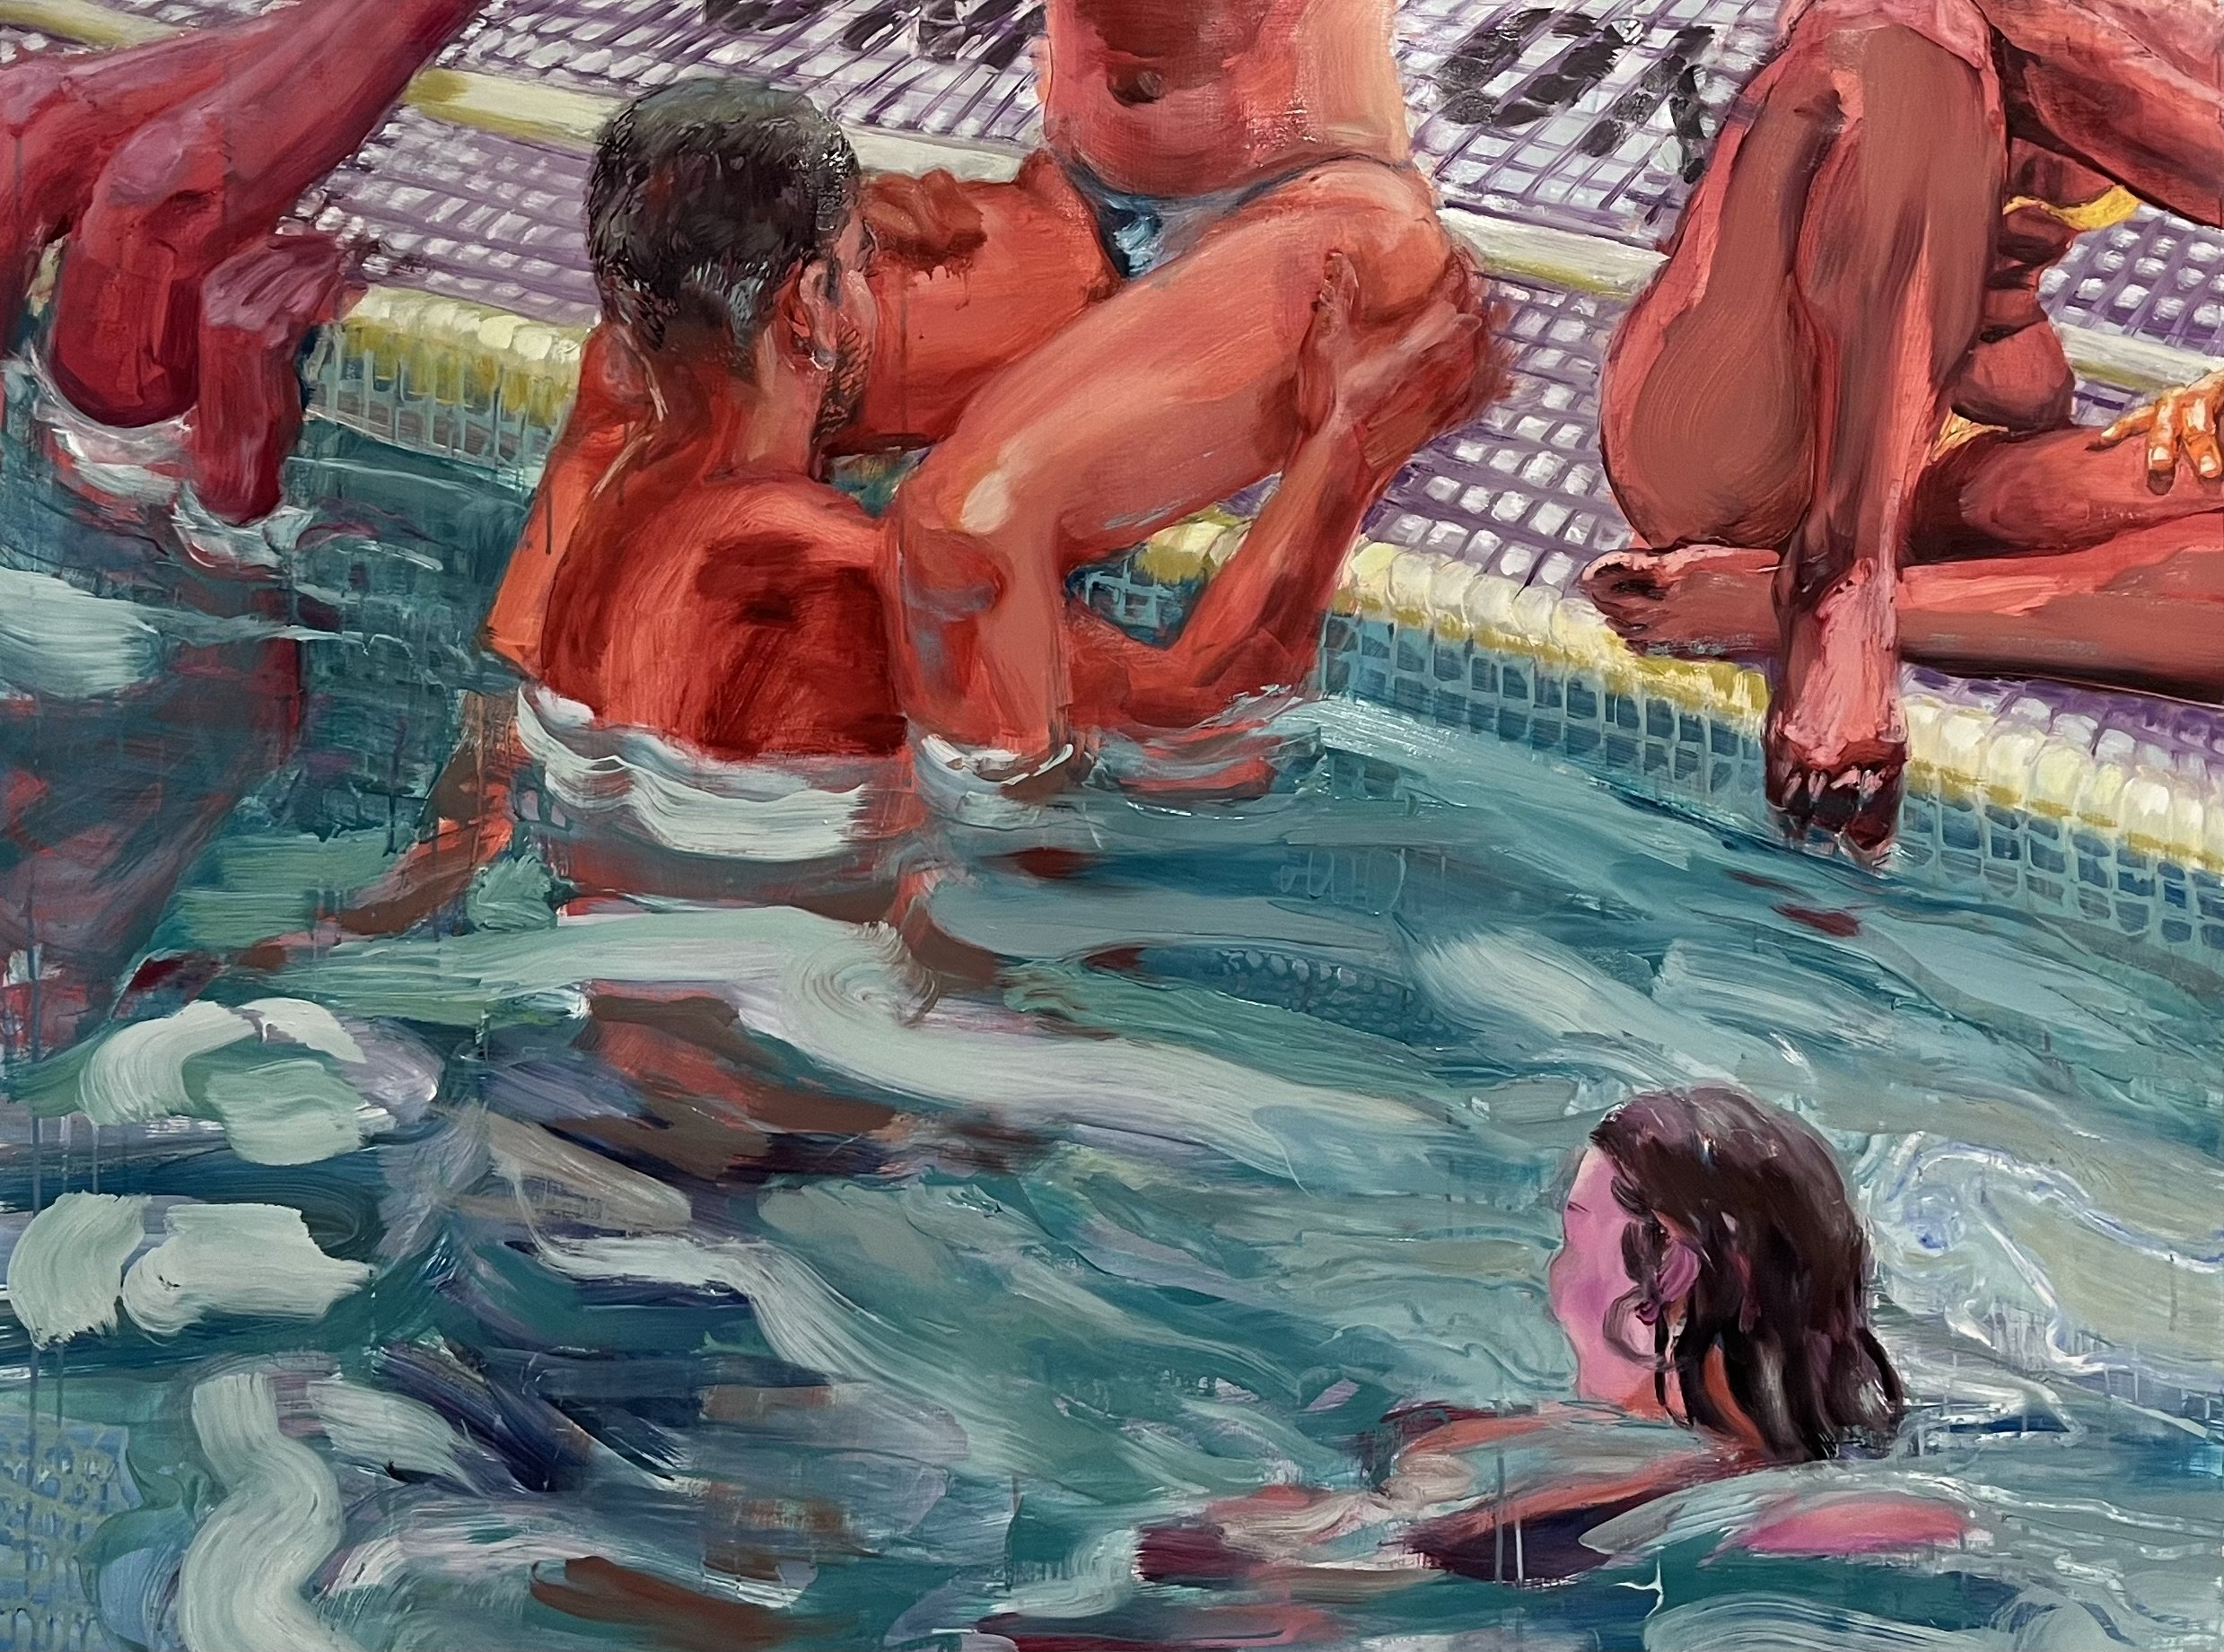 Pool Days: When it is too hot for the beach (2023) Oil, Acrylic and Pastel on Arches Paper, 50"x40"